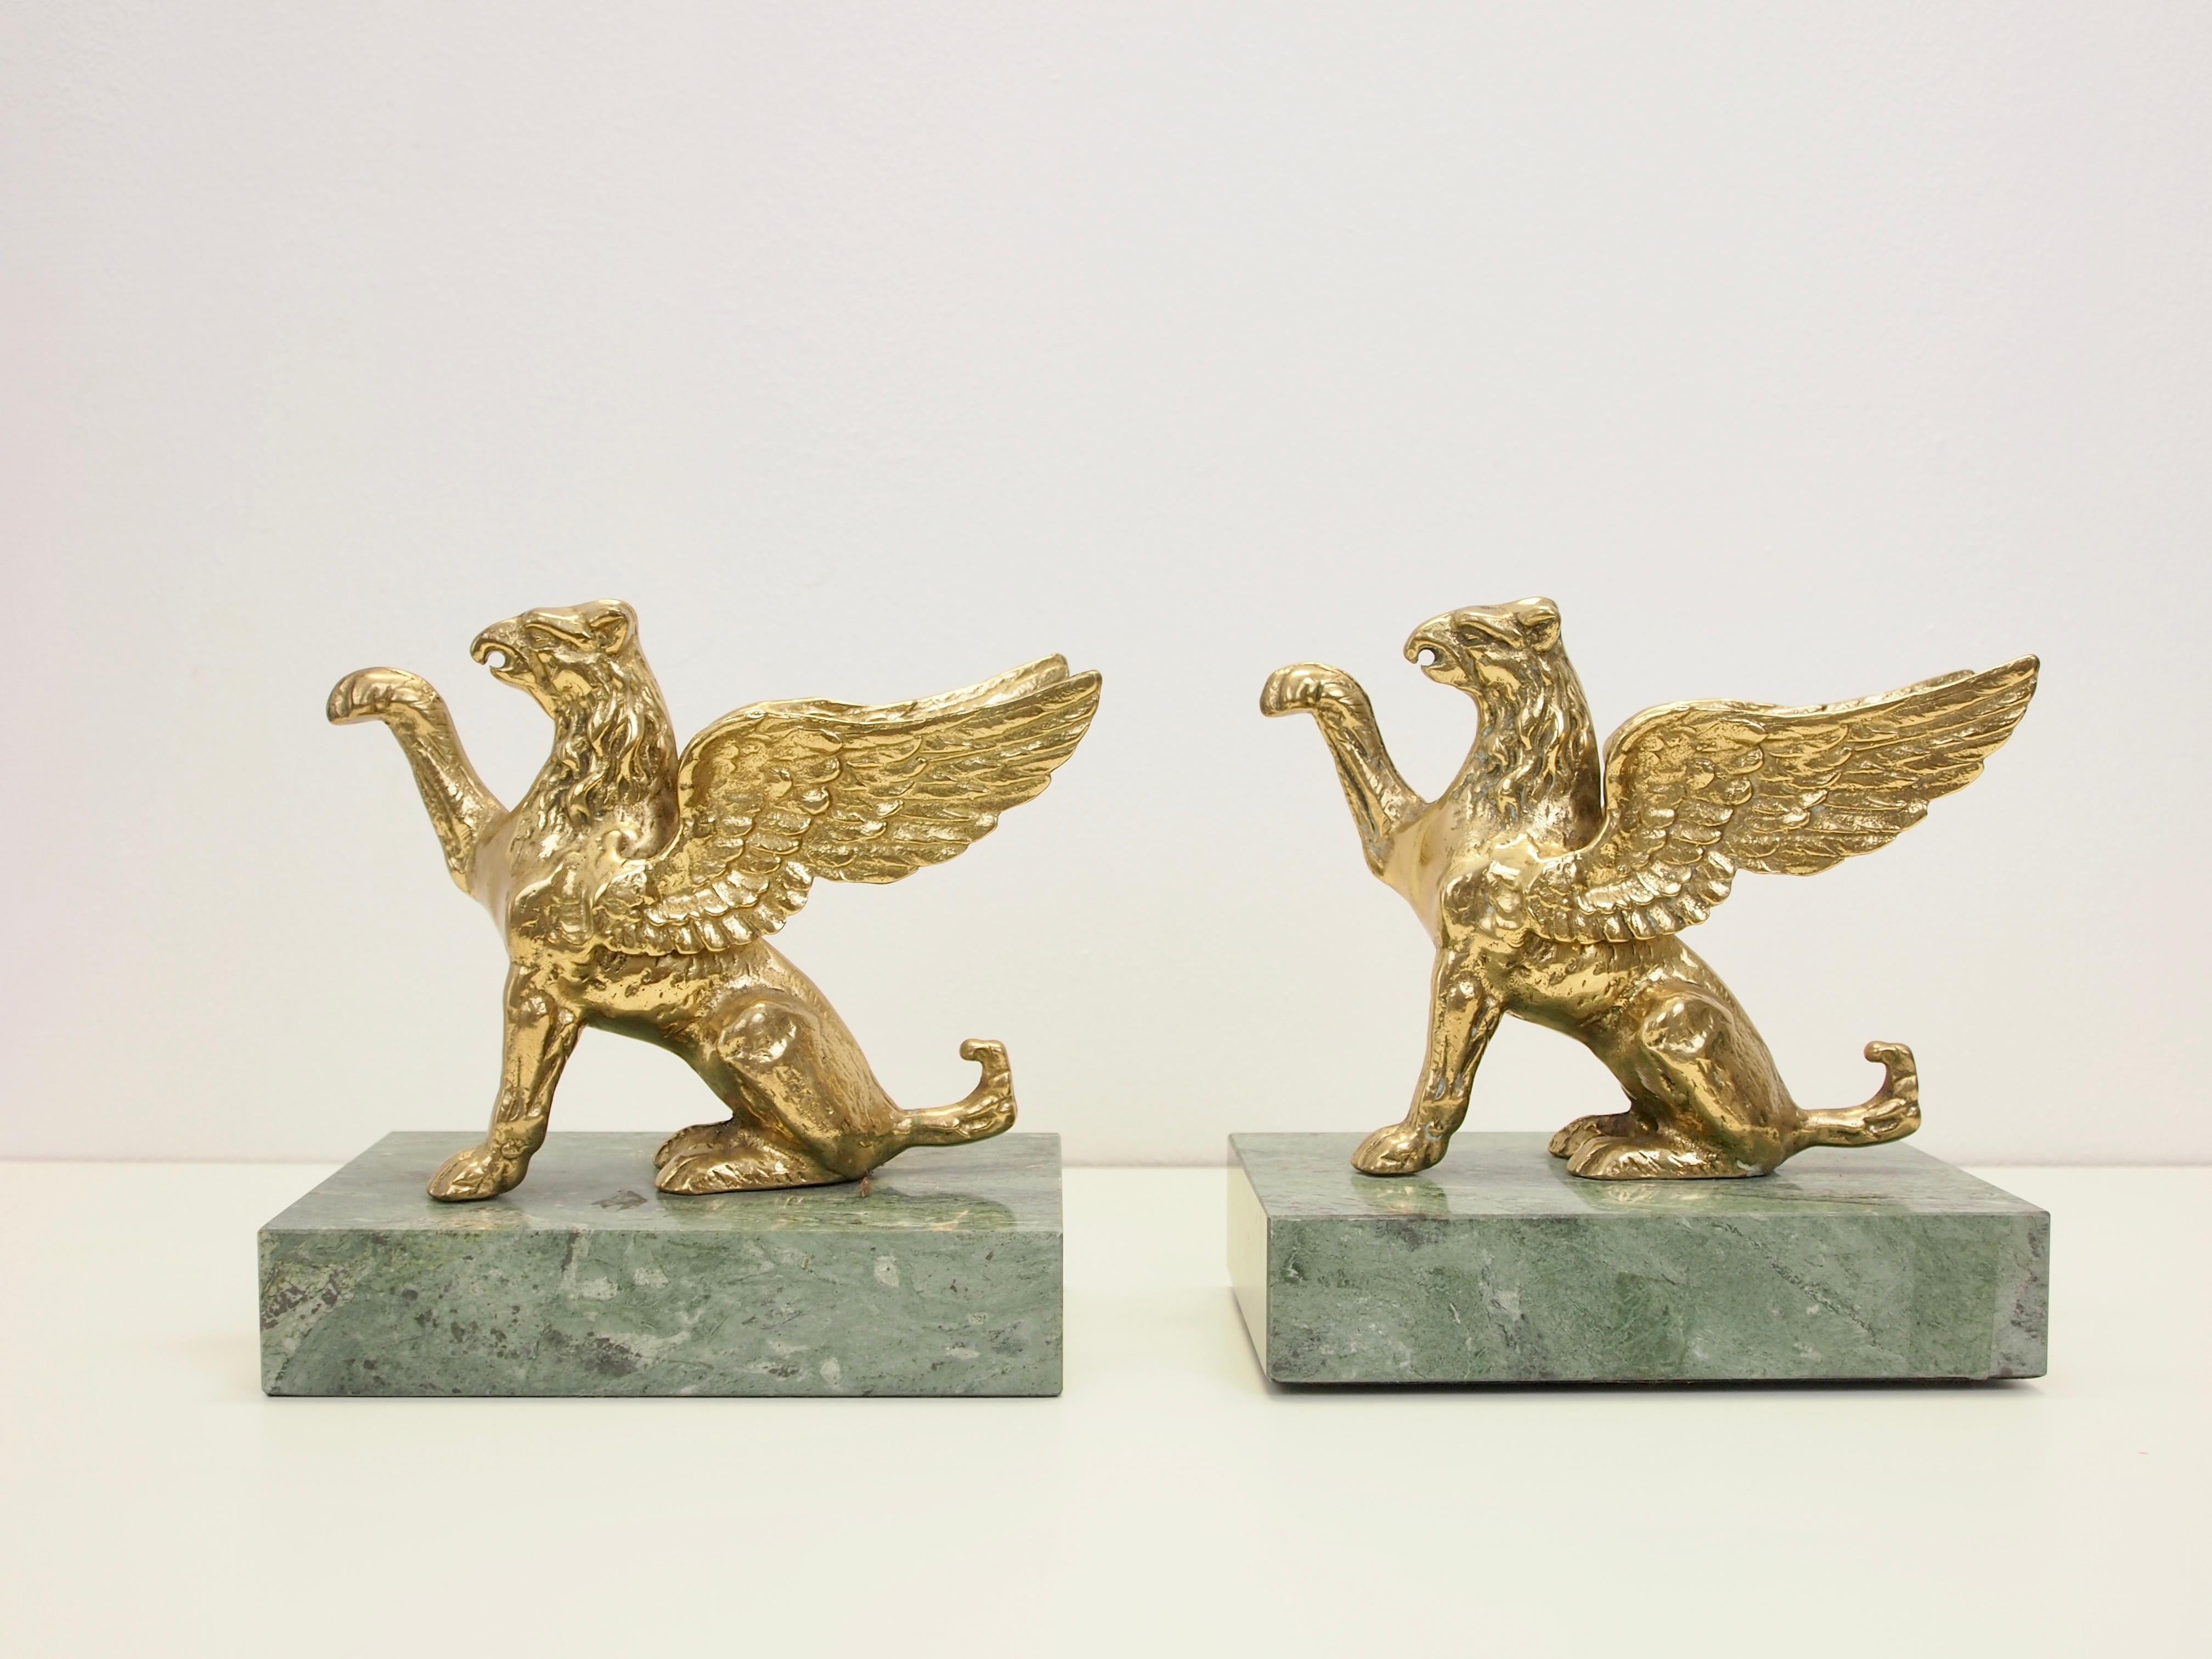 Stunning pair of 2 vintage brass figurines in the shape of 2 griffins on green marble pedestals.

The griffin (or griffon) is a legendary creature with the body, tail, and back legs of a lion; the head and wings of an eagle; and sometimes an